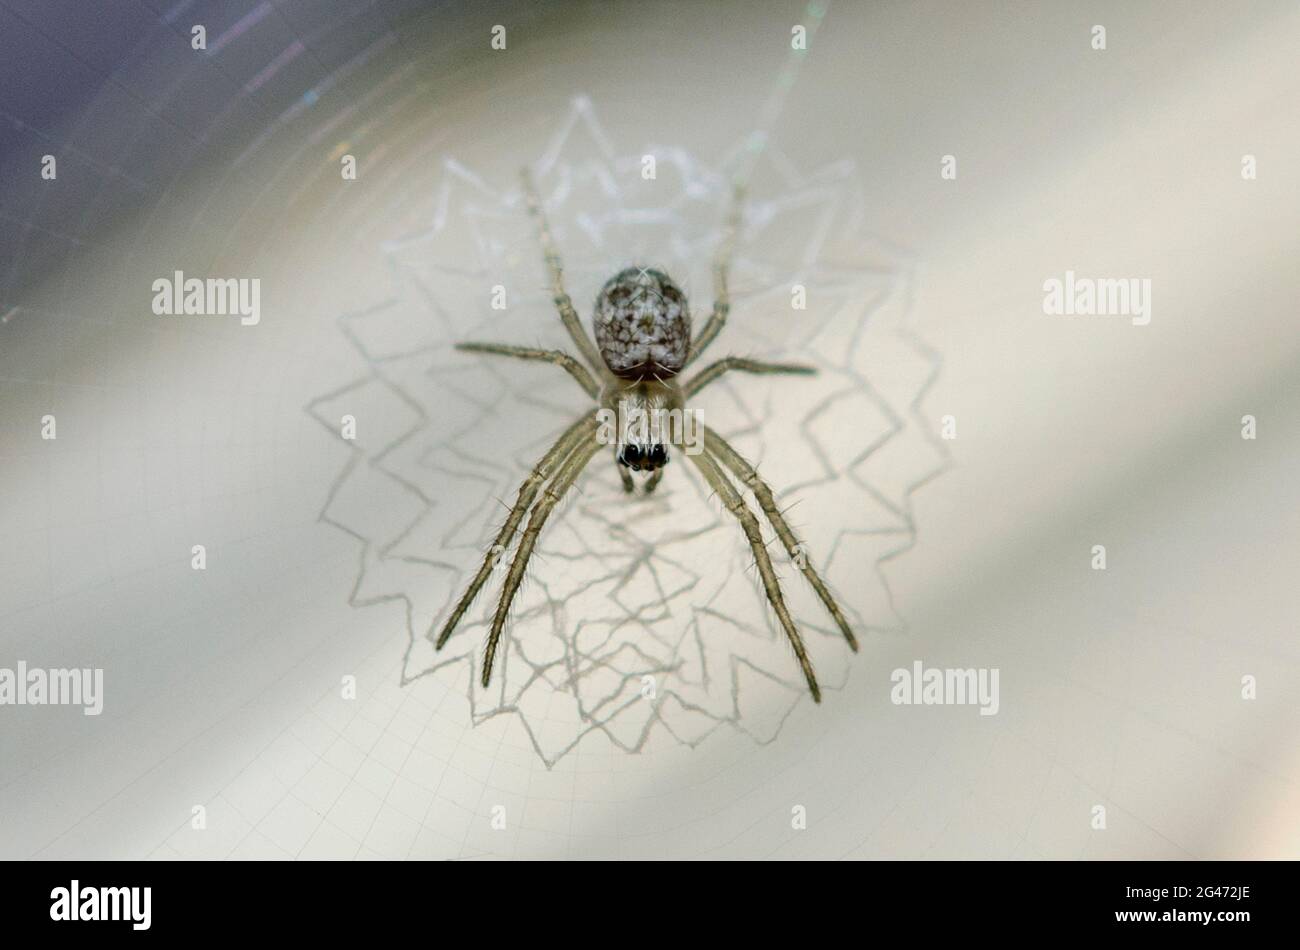 Juvenile Spider, Argiope sp, with lace-like patterned web stabilimentum, Klungkung, Bali, Indonesia Stock Photo